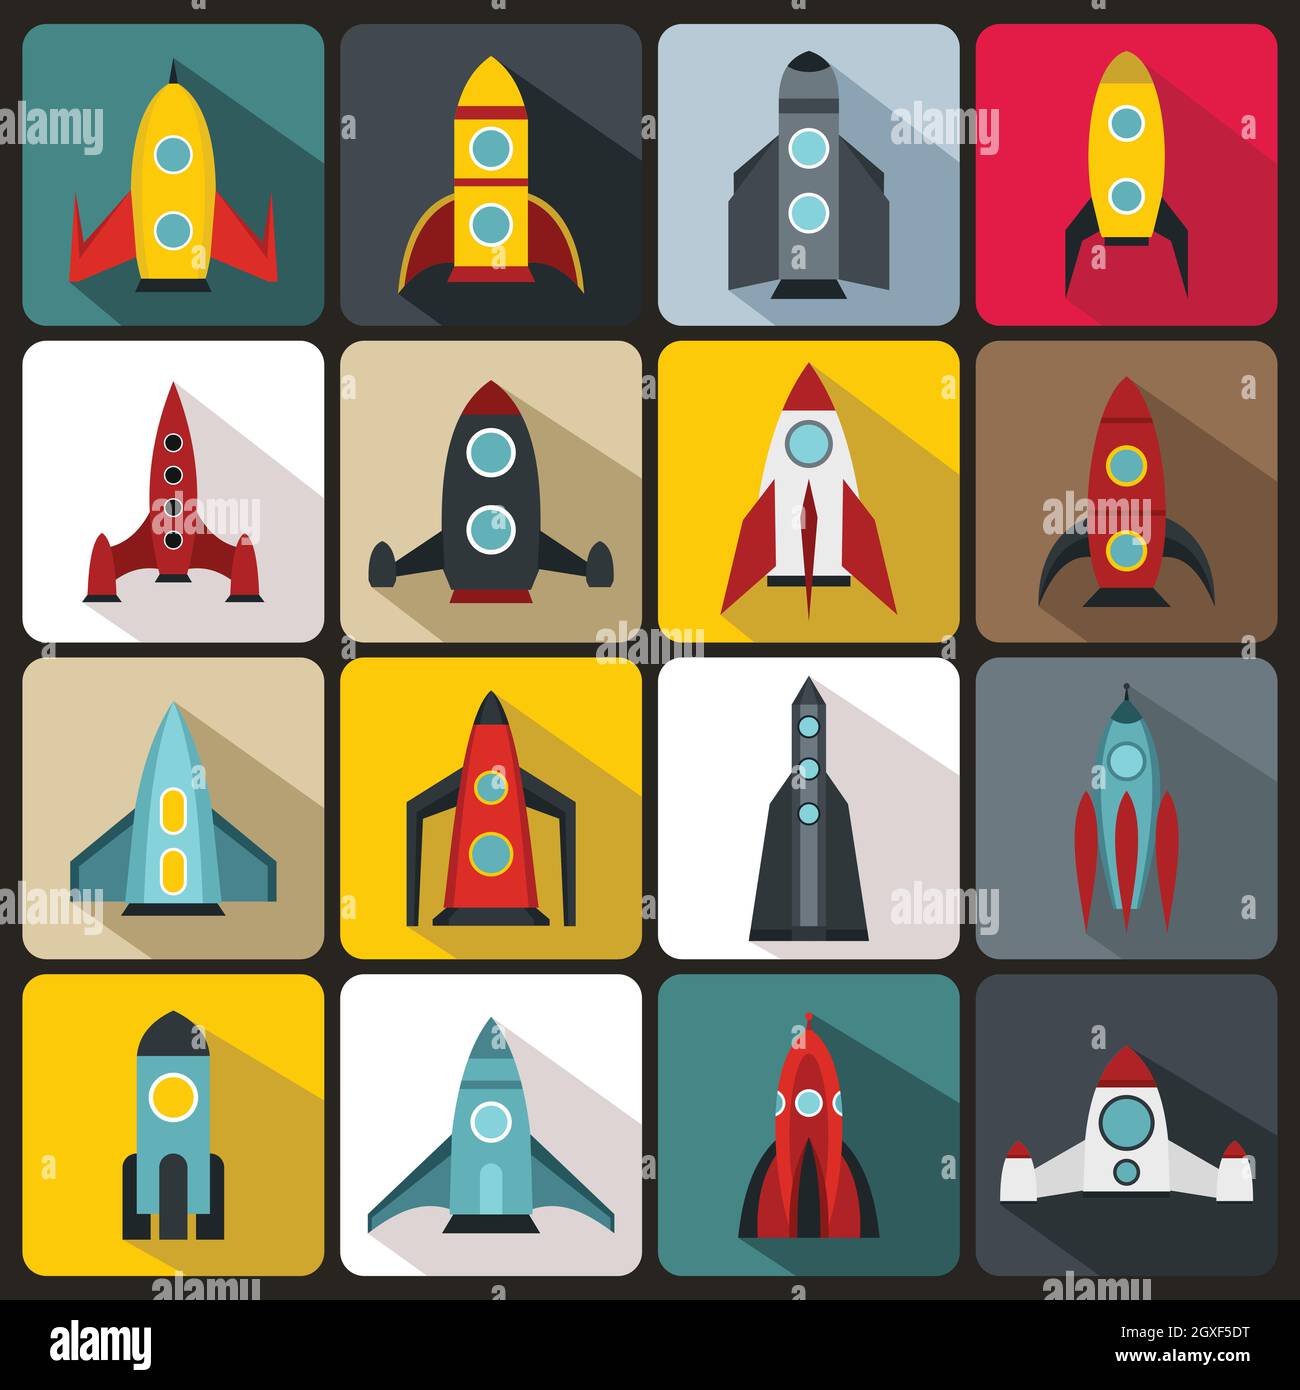 Rocket icons set in flat style for any design Stock Photo